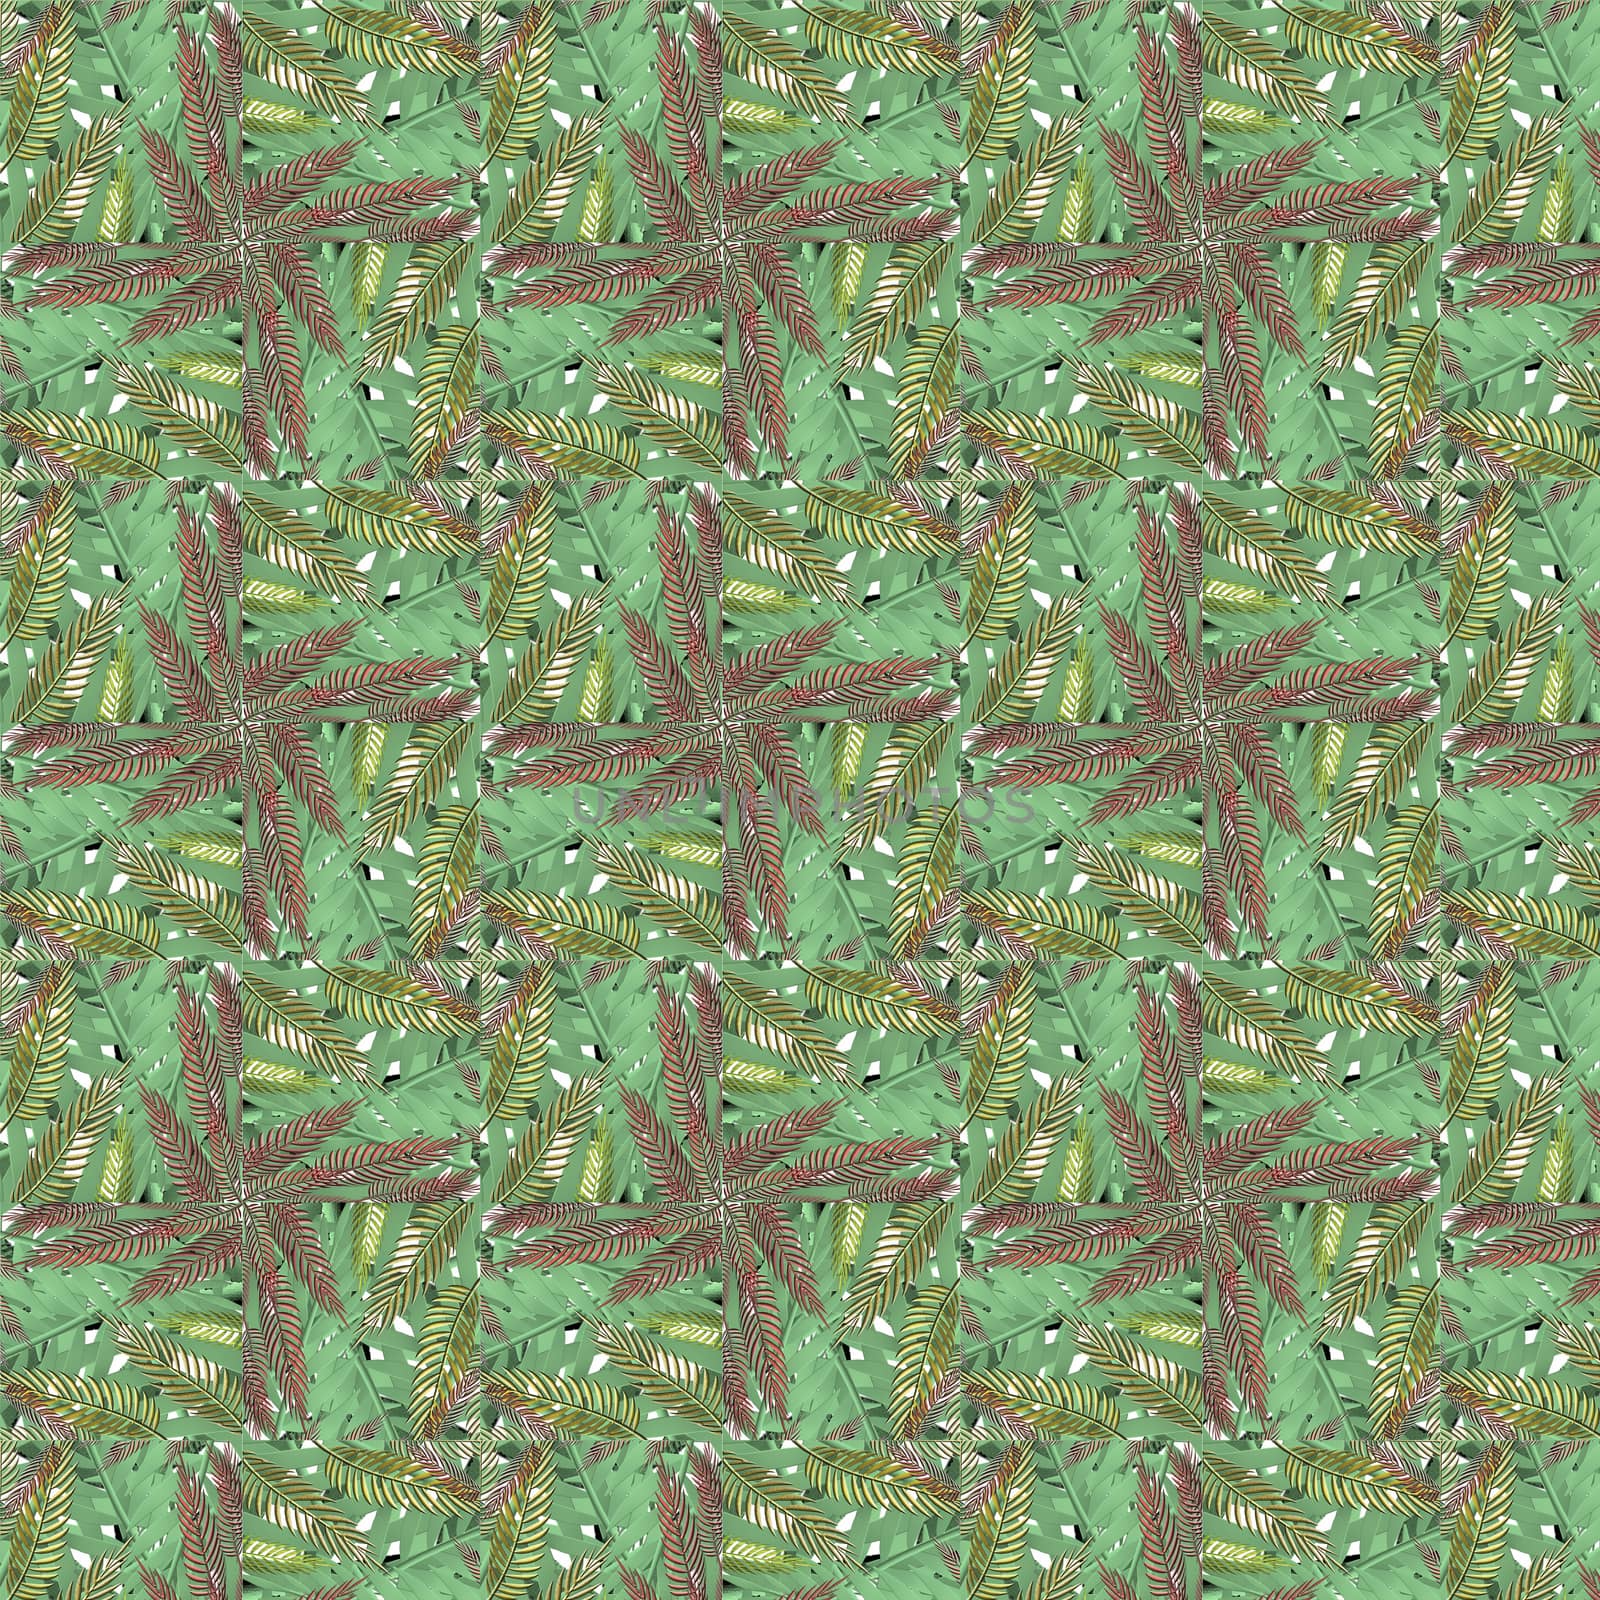 Seamless green tropical leaf pattern background in 3D illustration